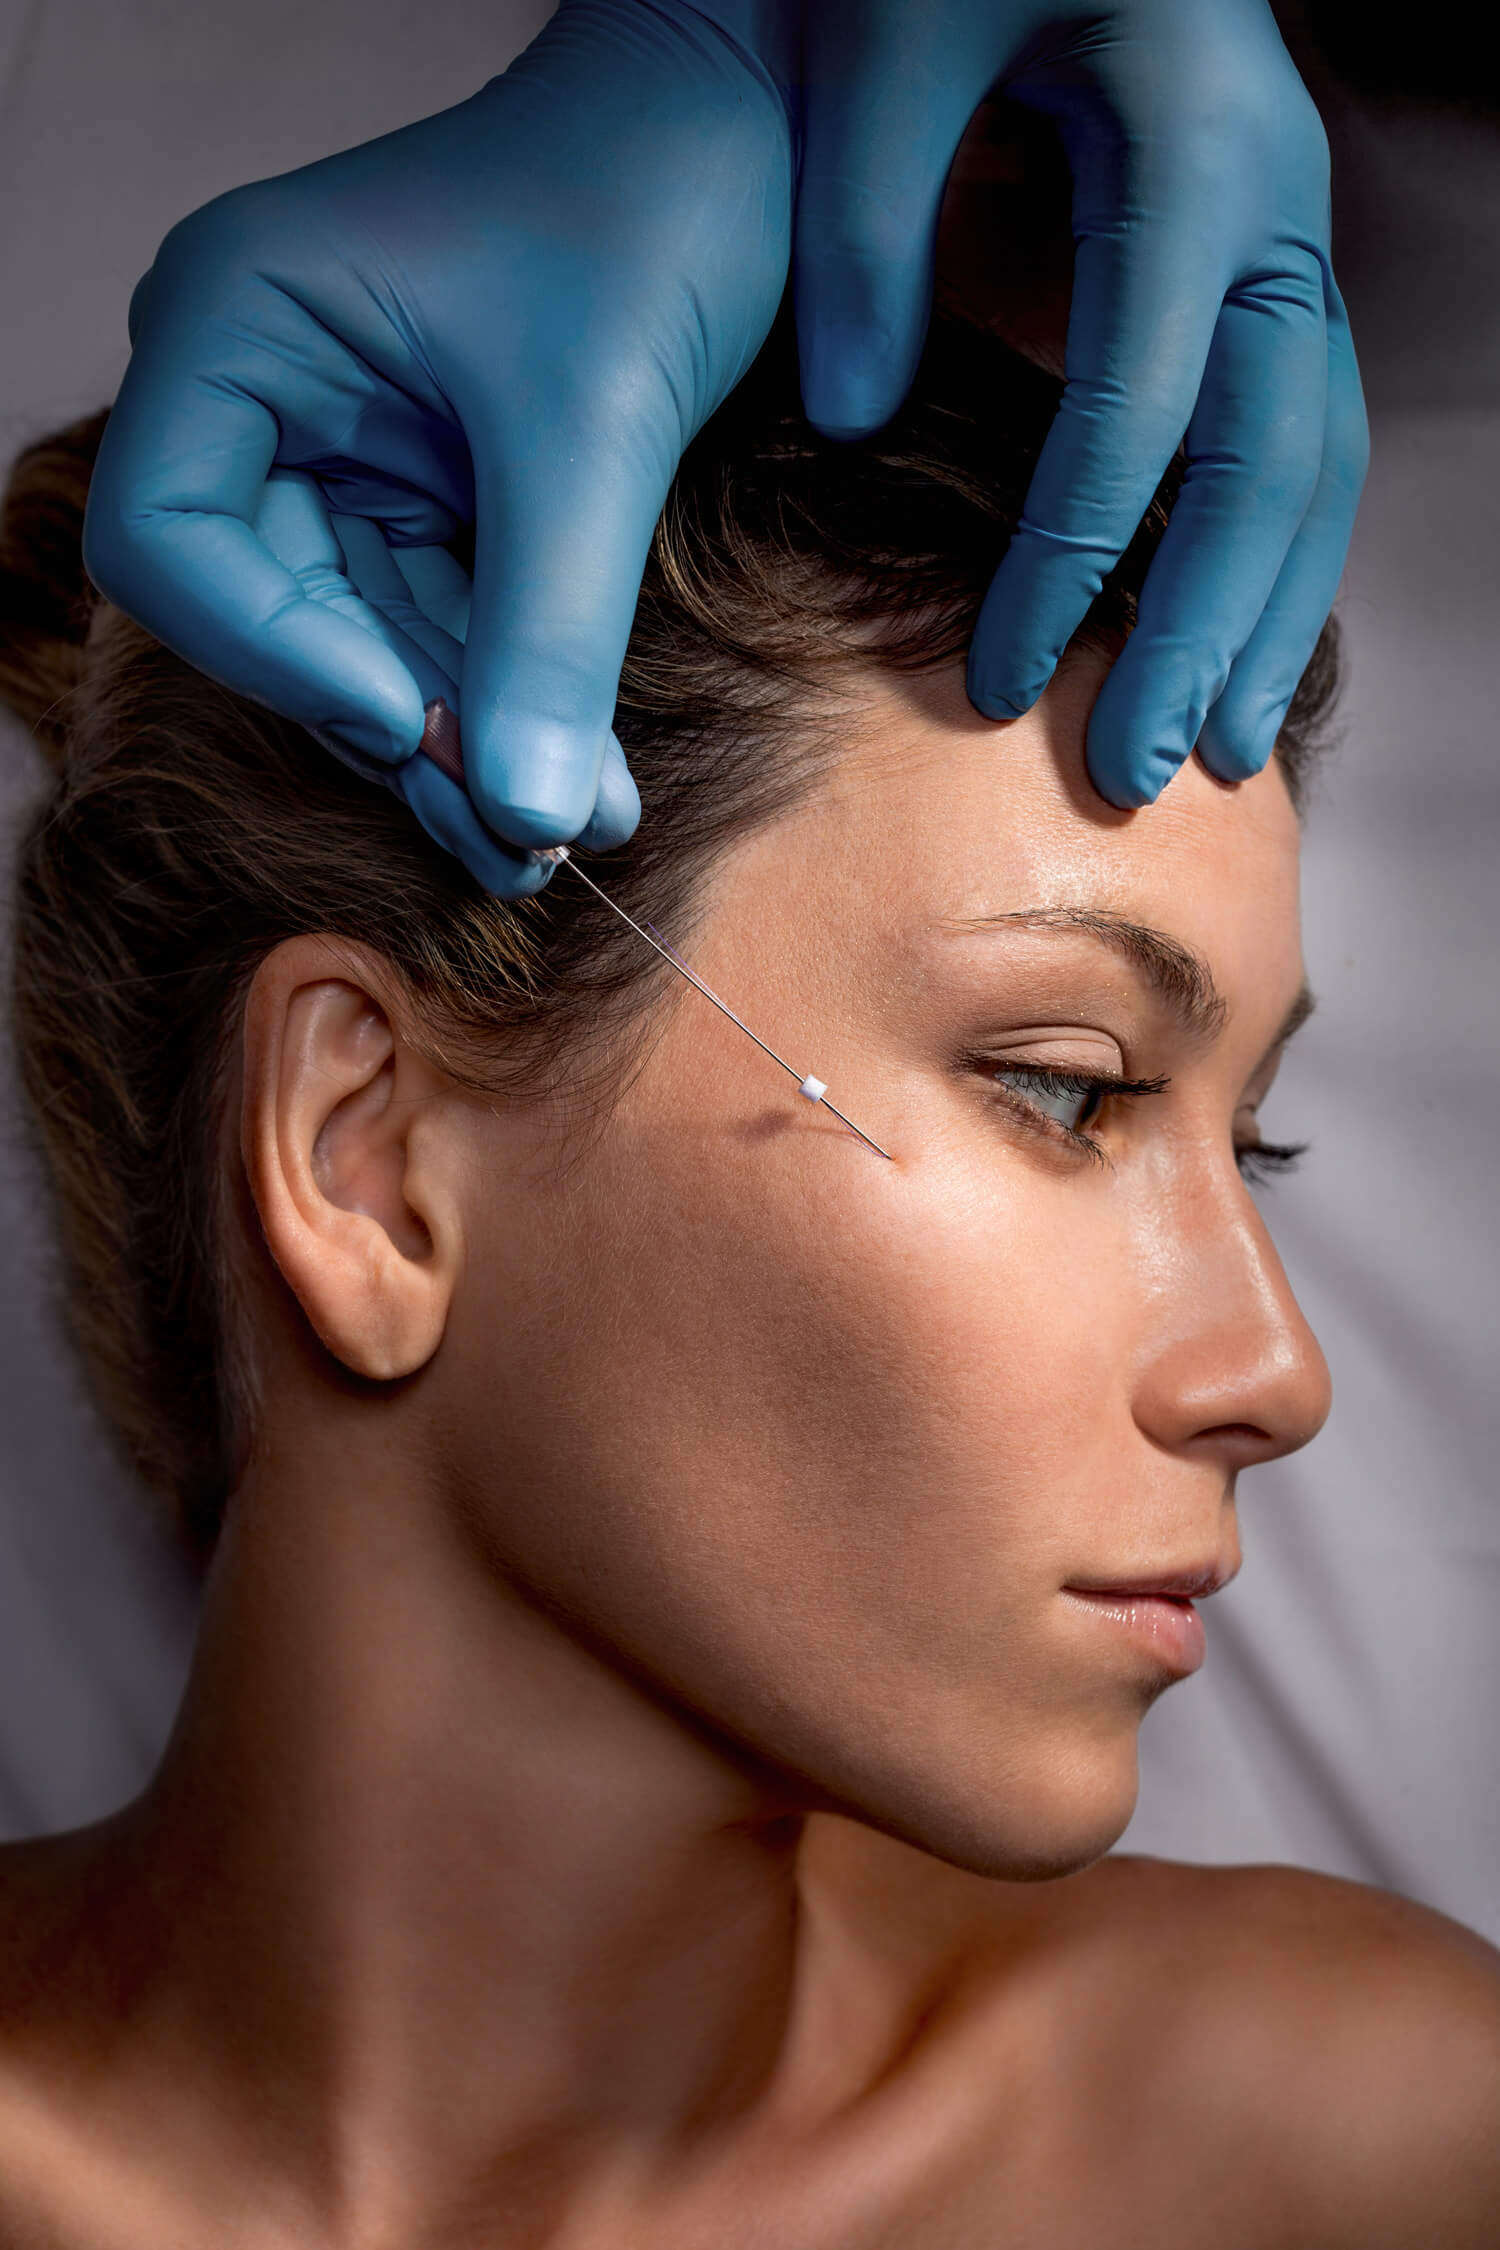 Plastic Surgeons Are Using New Techniques With Injectables to Sculpt the  Face